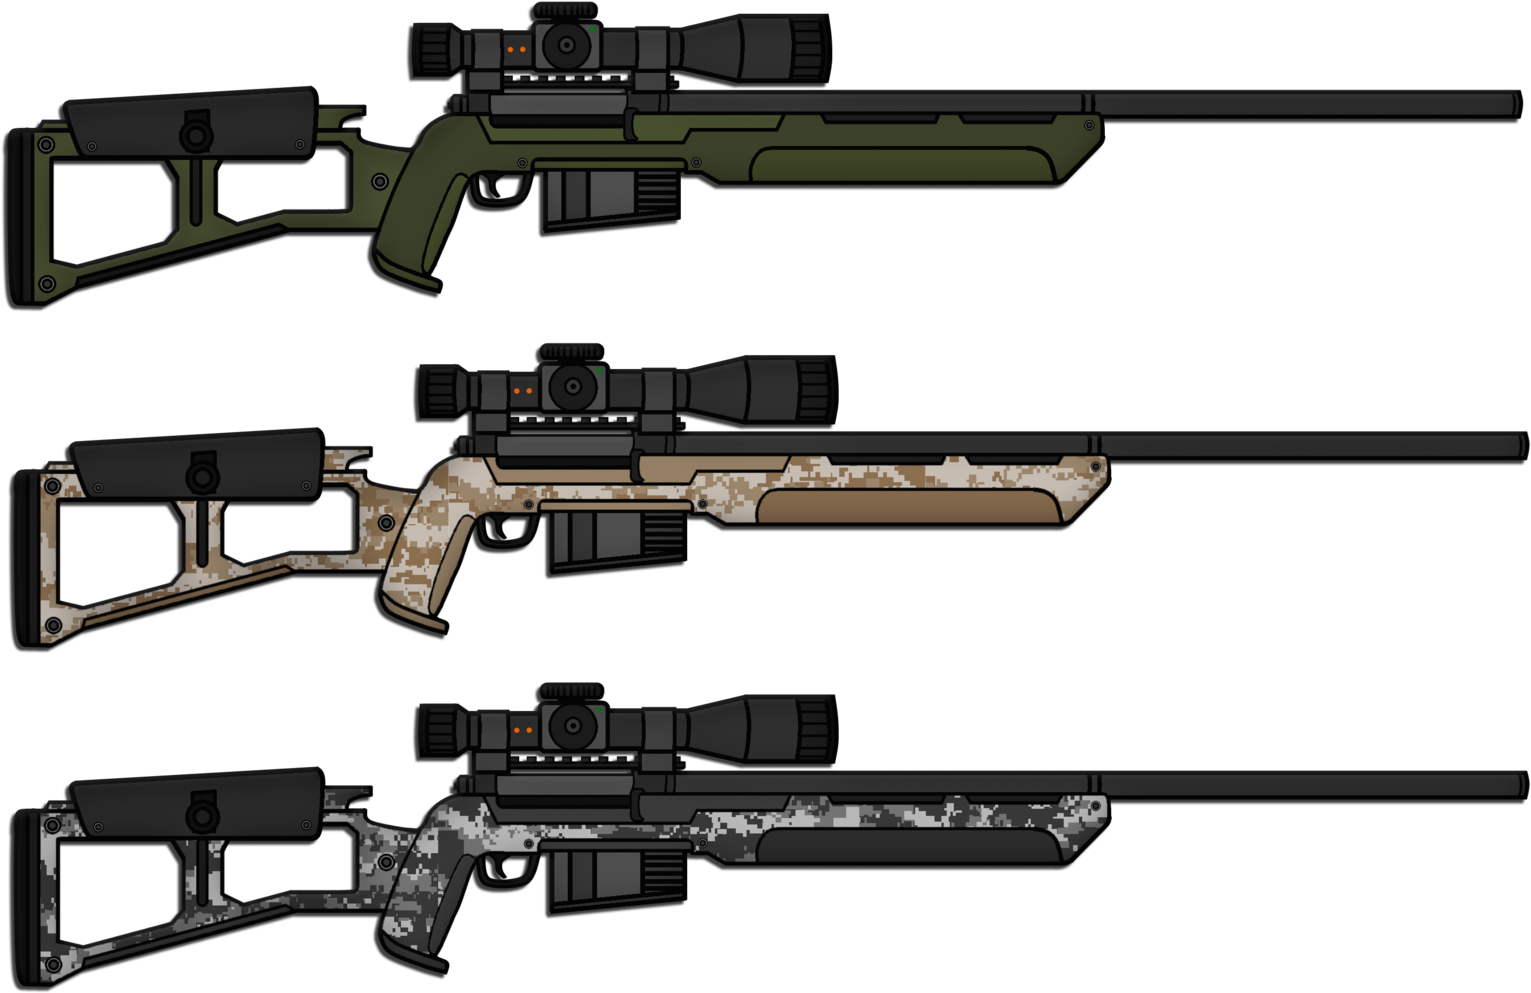 Drawn Snipers Simple - 7.62 Mm 돌격 소총 (1600x1067), Png Download